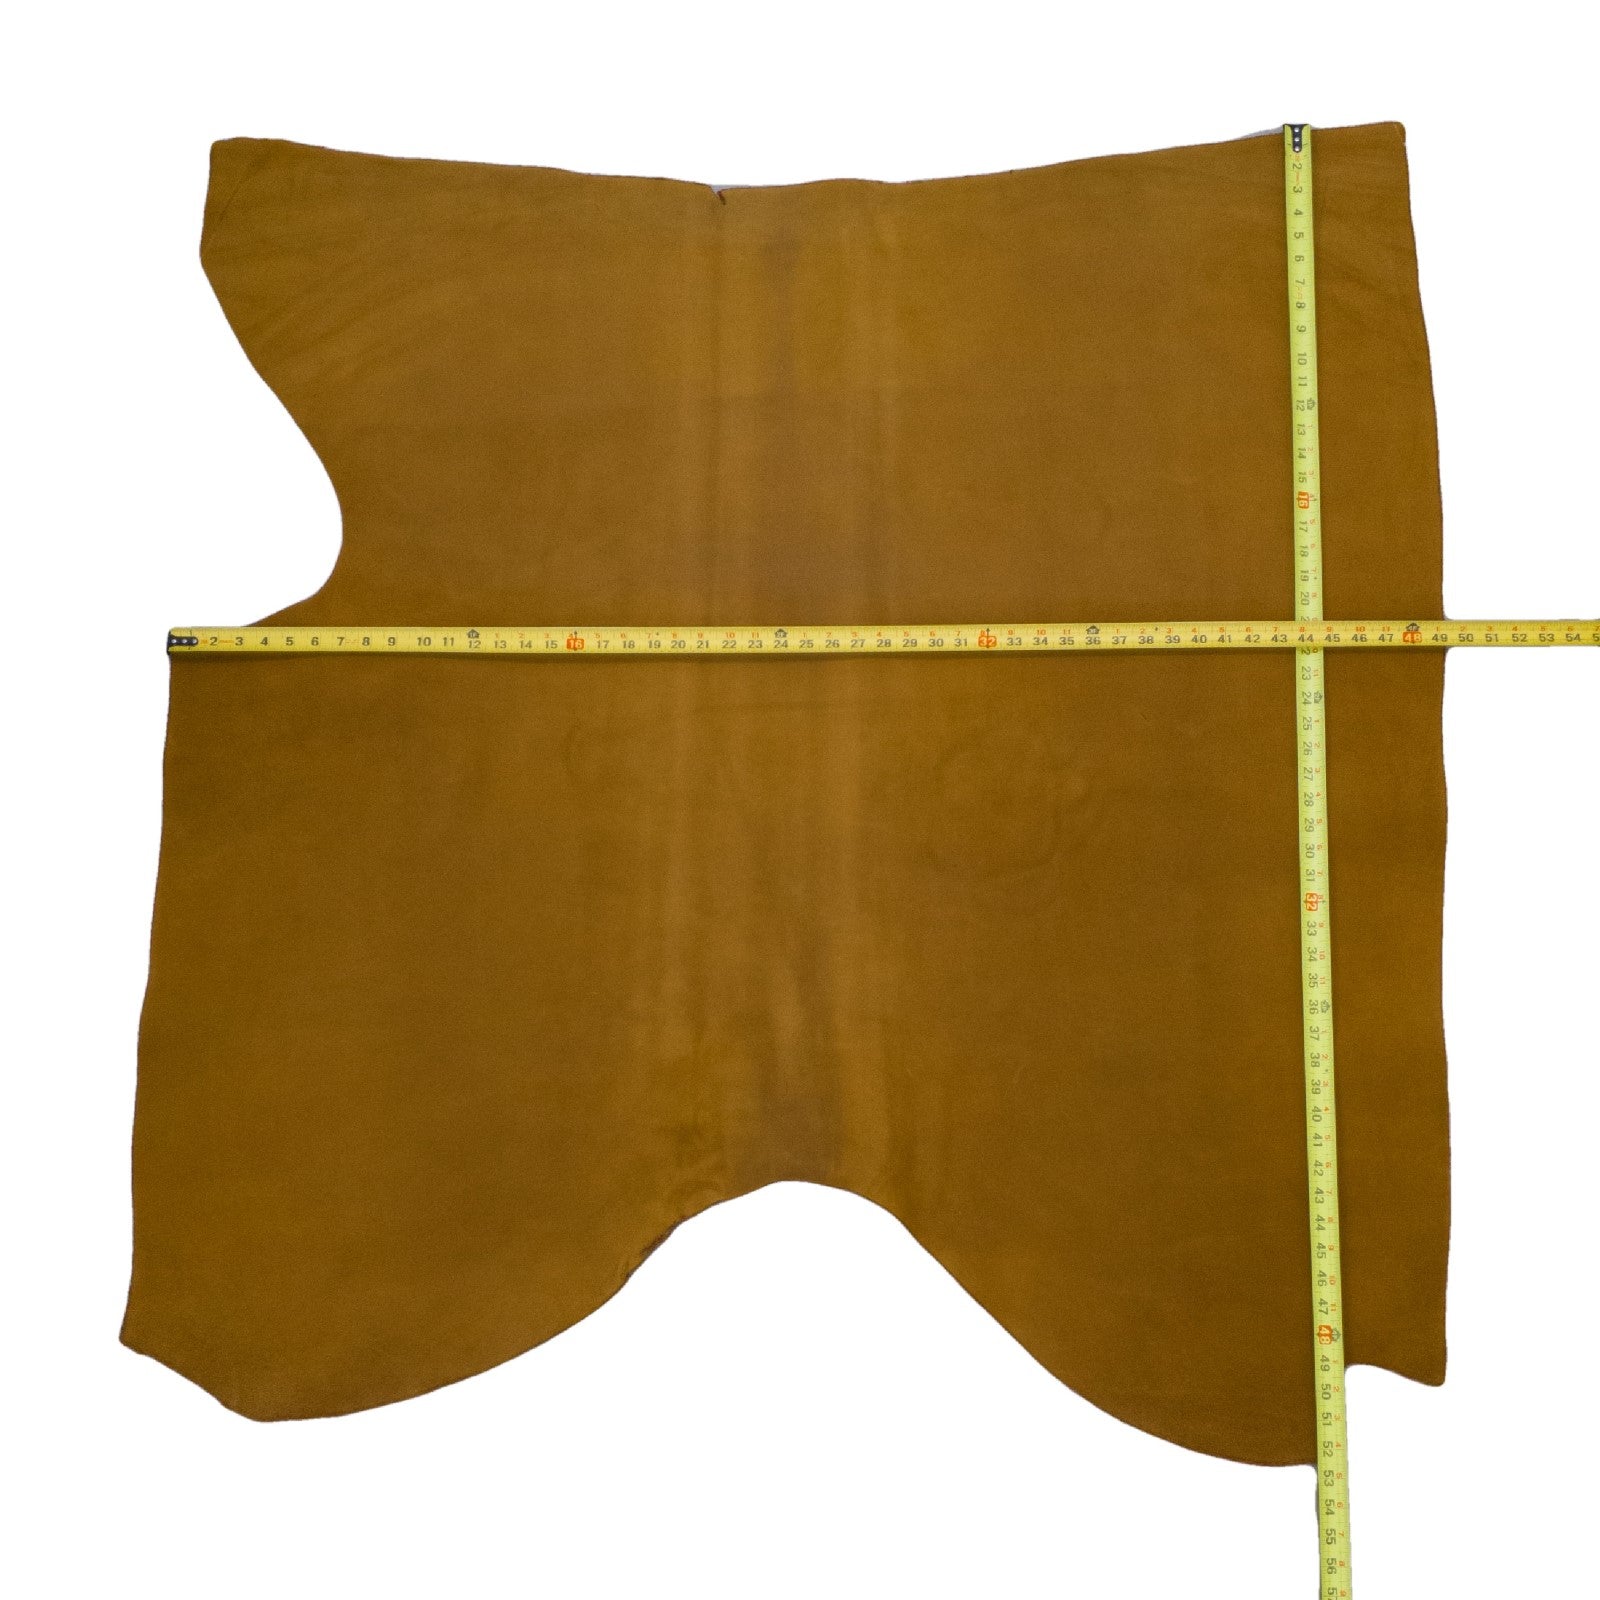 Bronze Brown Suede, 5-6 oz, 15 Sq Ft Average, Oil Tan,  | The Leather Guy